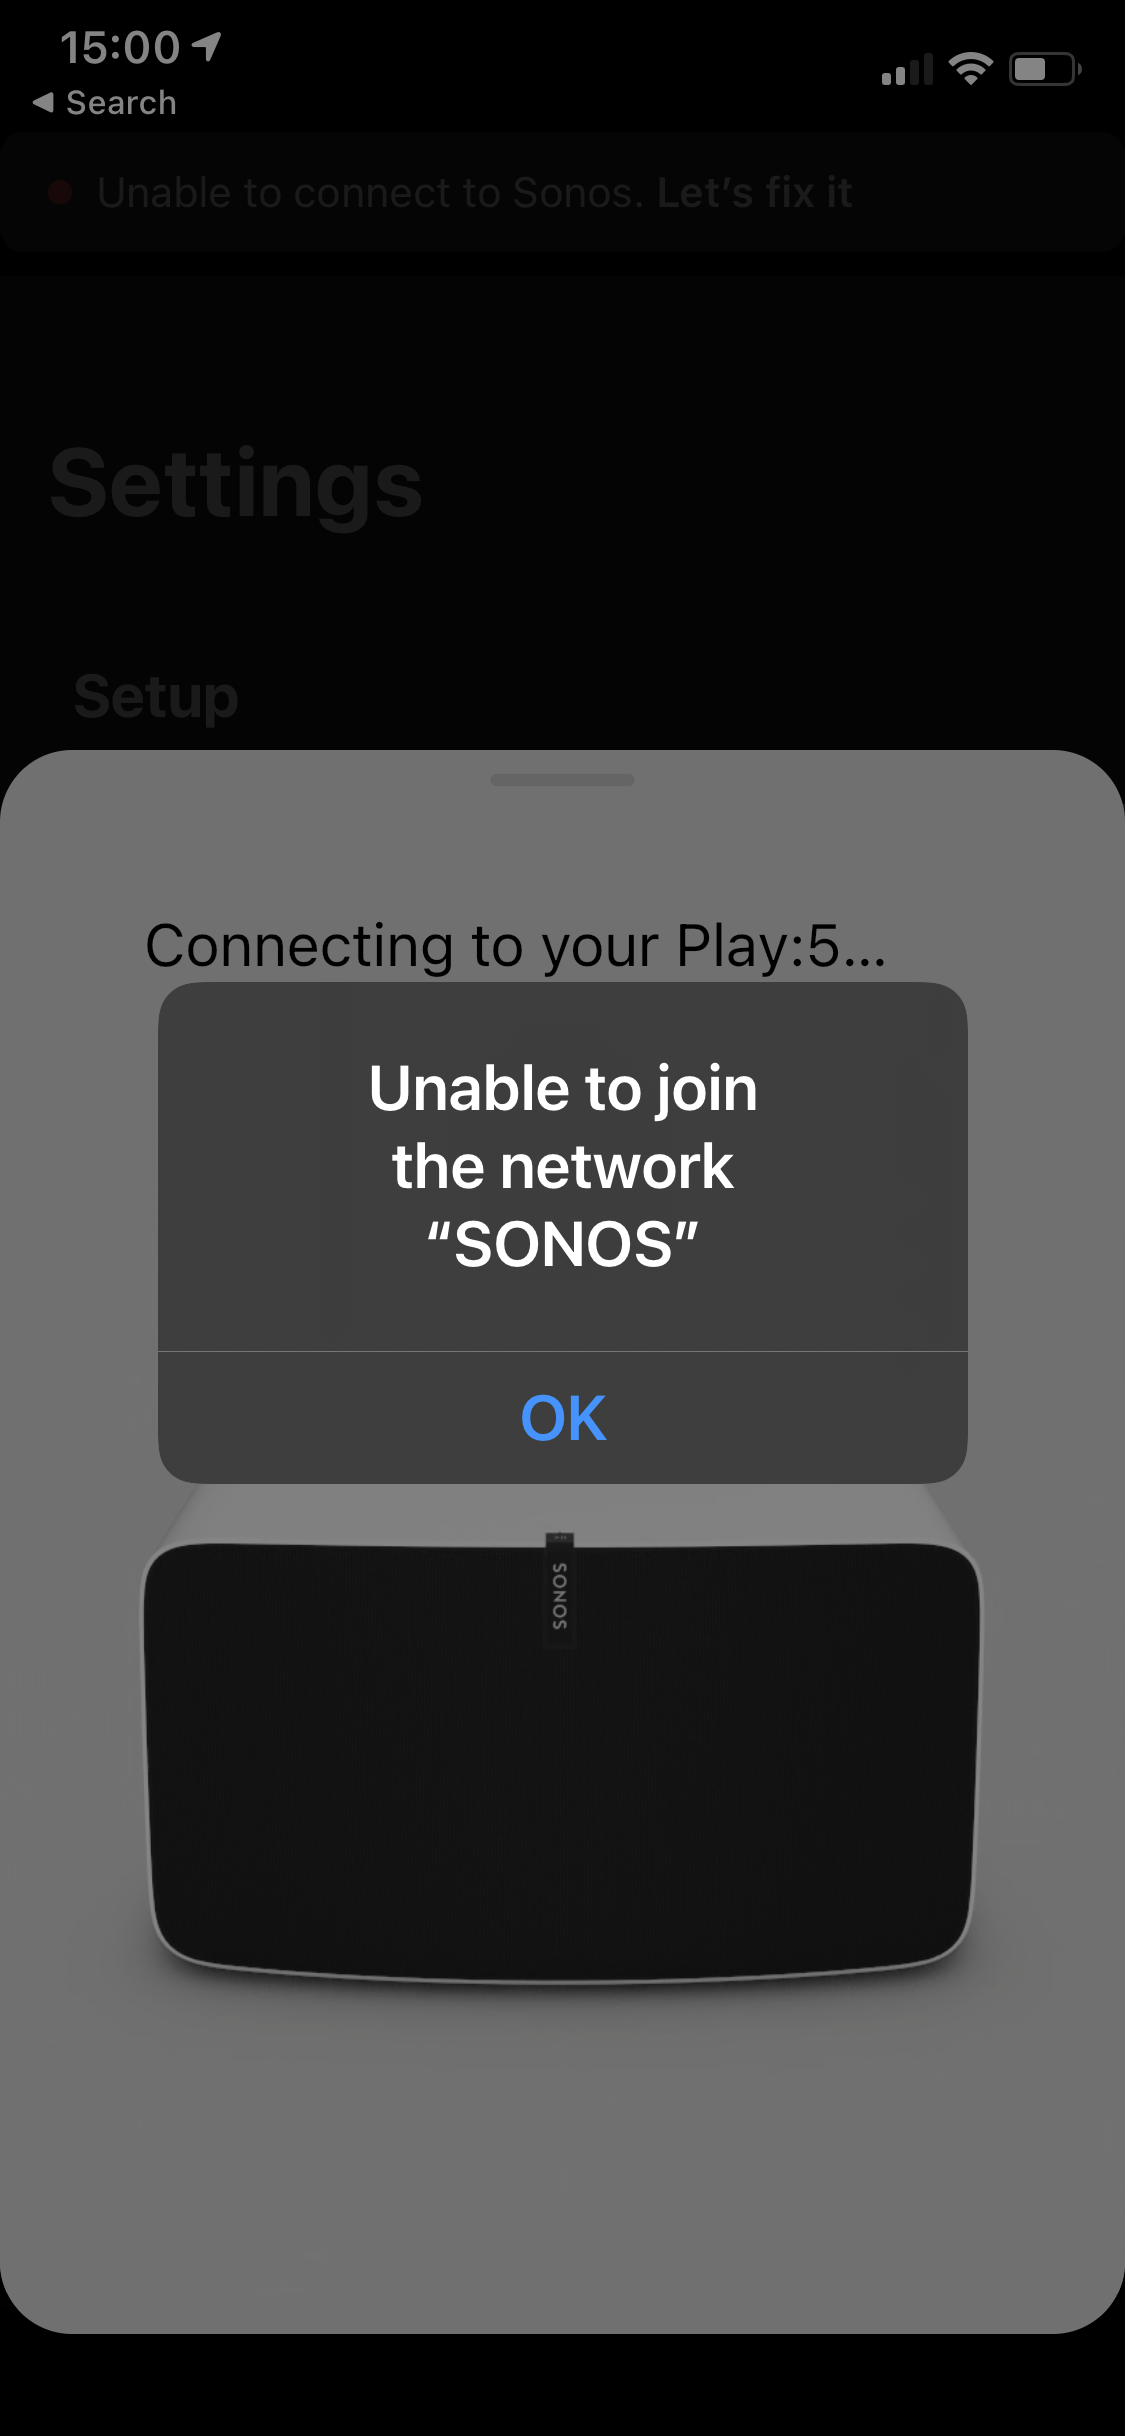 Creep Inspektion Bevidstløs Impossible to connect after change of Wifi network | Sonos Community